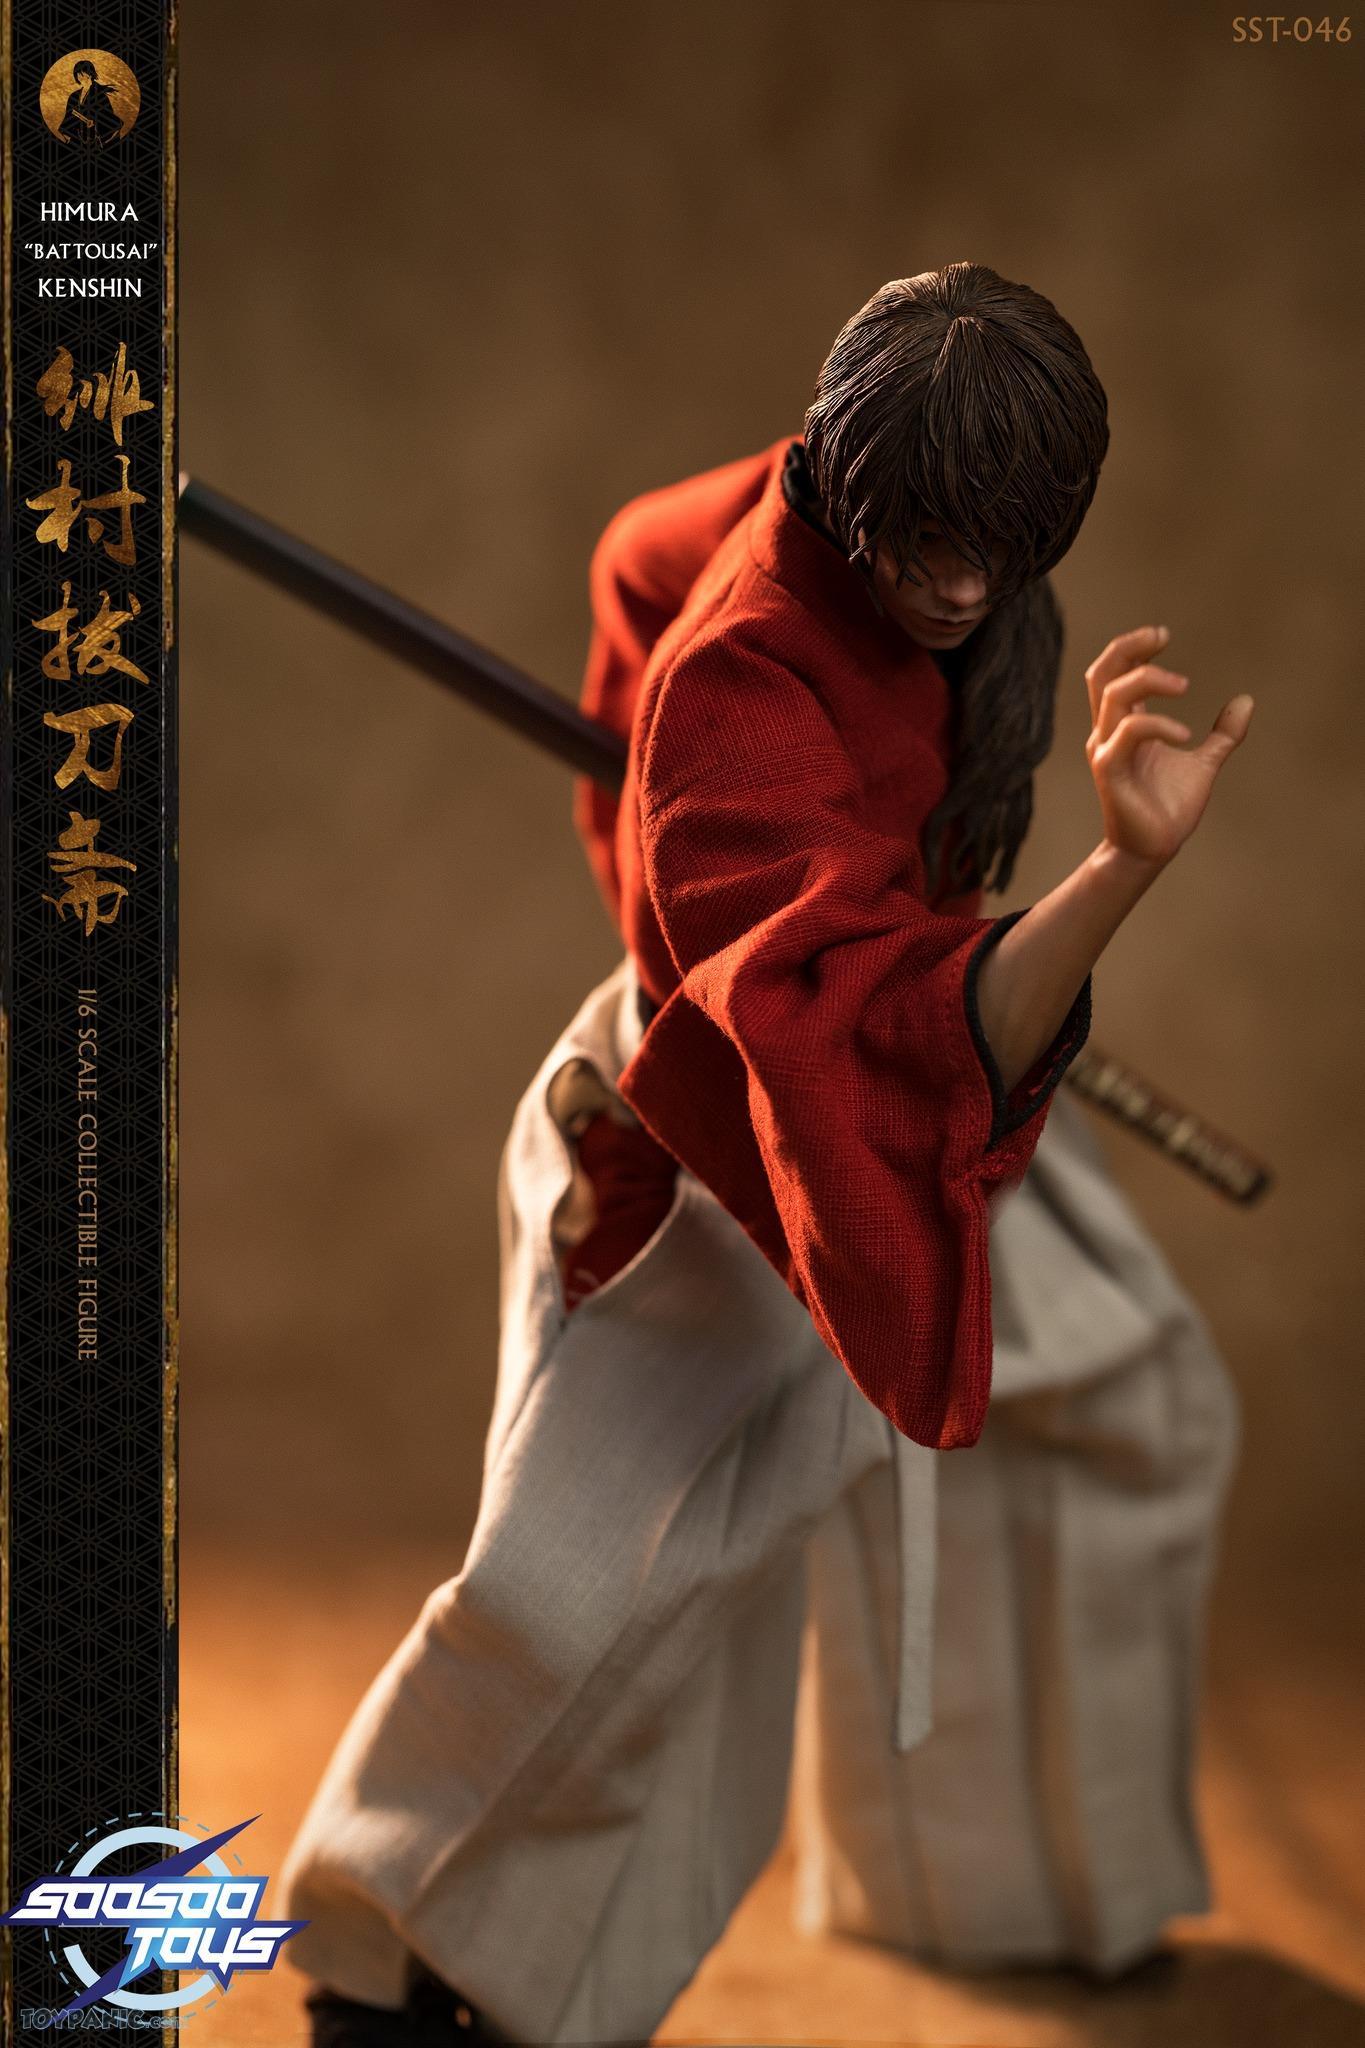 Japanese - NEW PRODUCT: 1/6 scale Rurouni Kenshin Collectible Figure from SooSooToys 712202251233PM_9601394